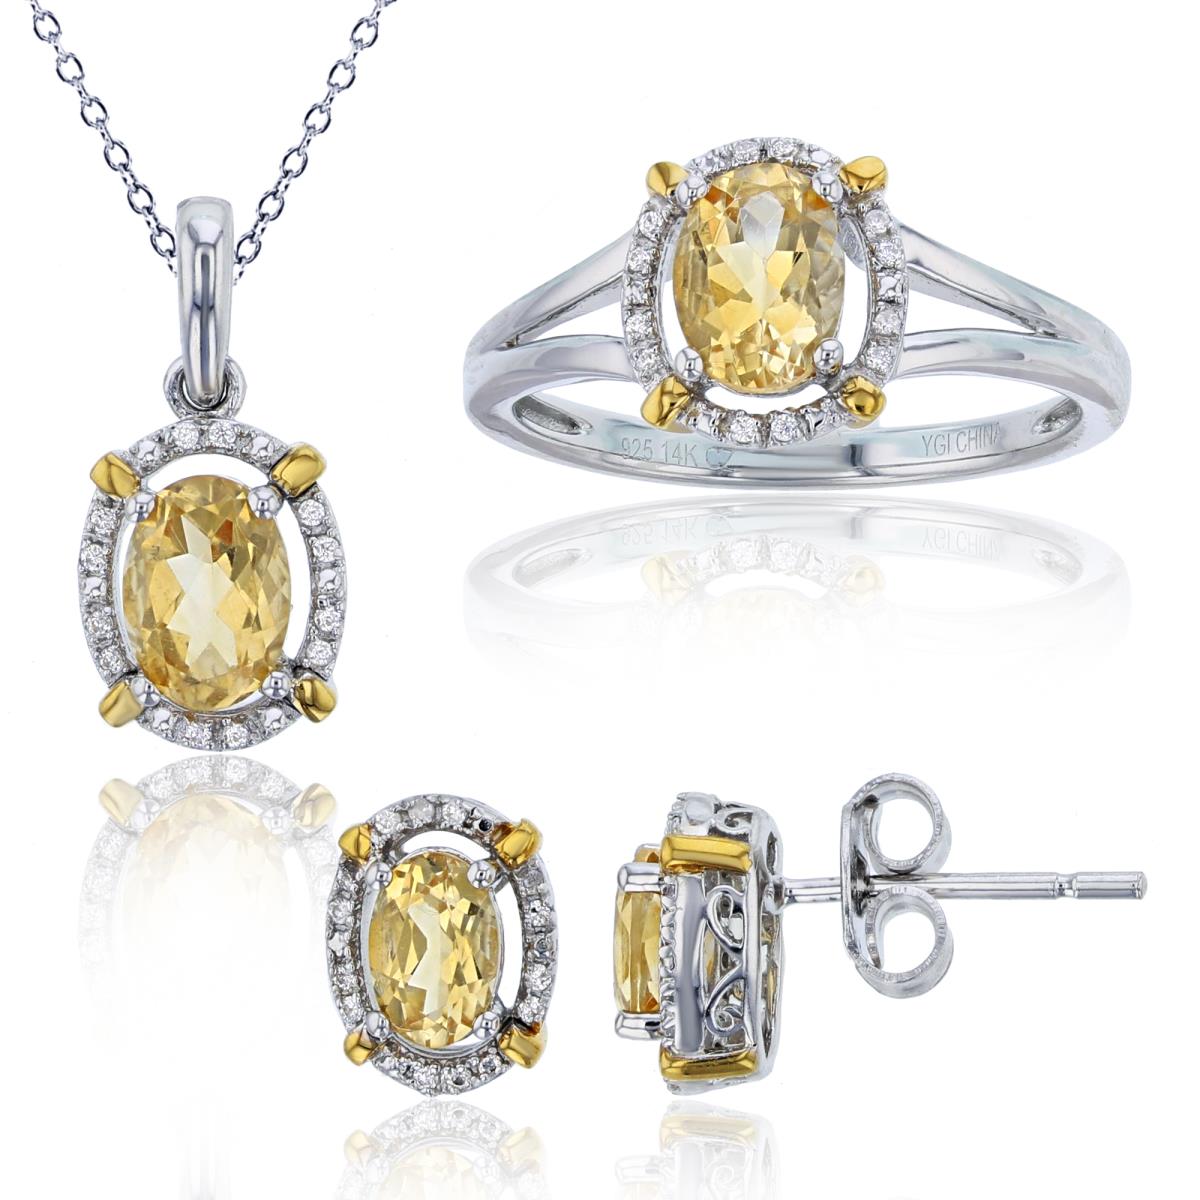 14K Yellow Gold & Sterling Silver Rhodium 0.14 CTTW Rnd Diamonds & Ov Citrine Ring/ Earrings/ 18"Necklace Set